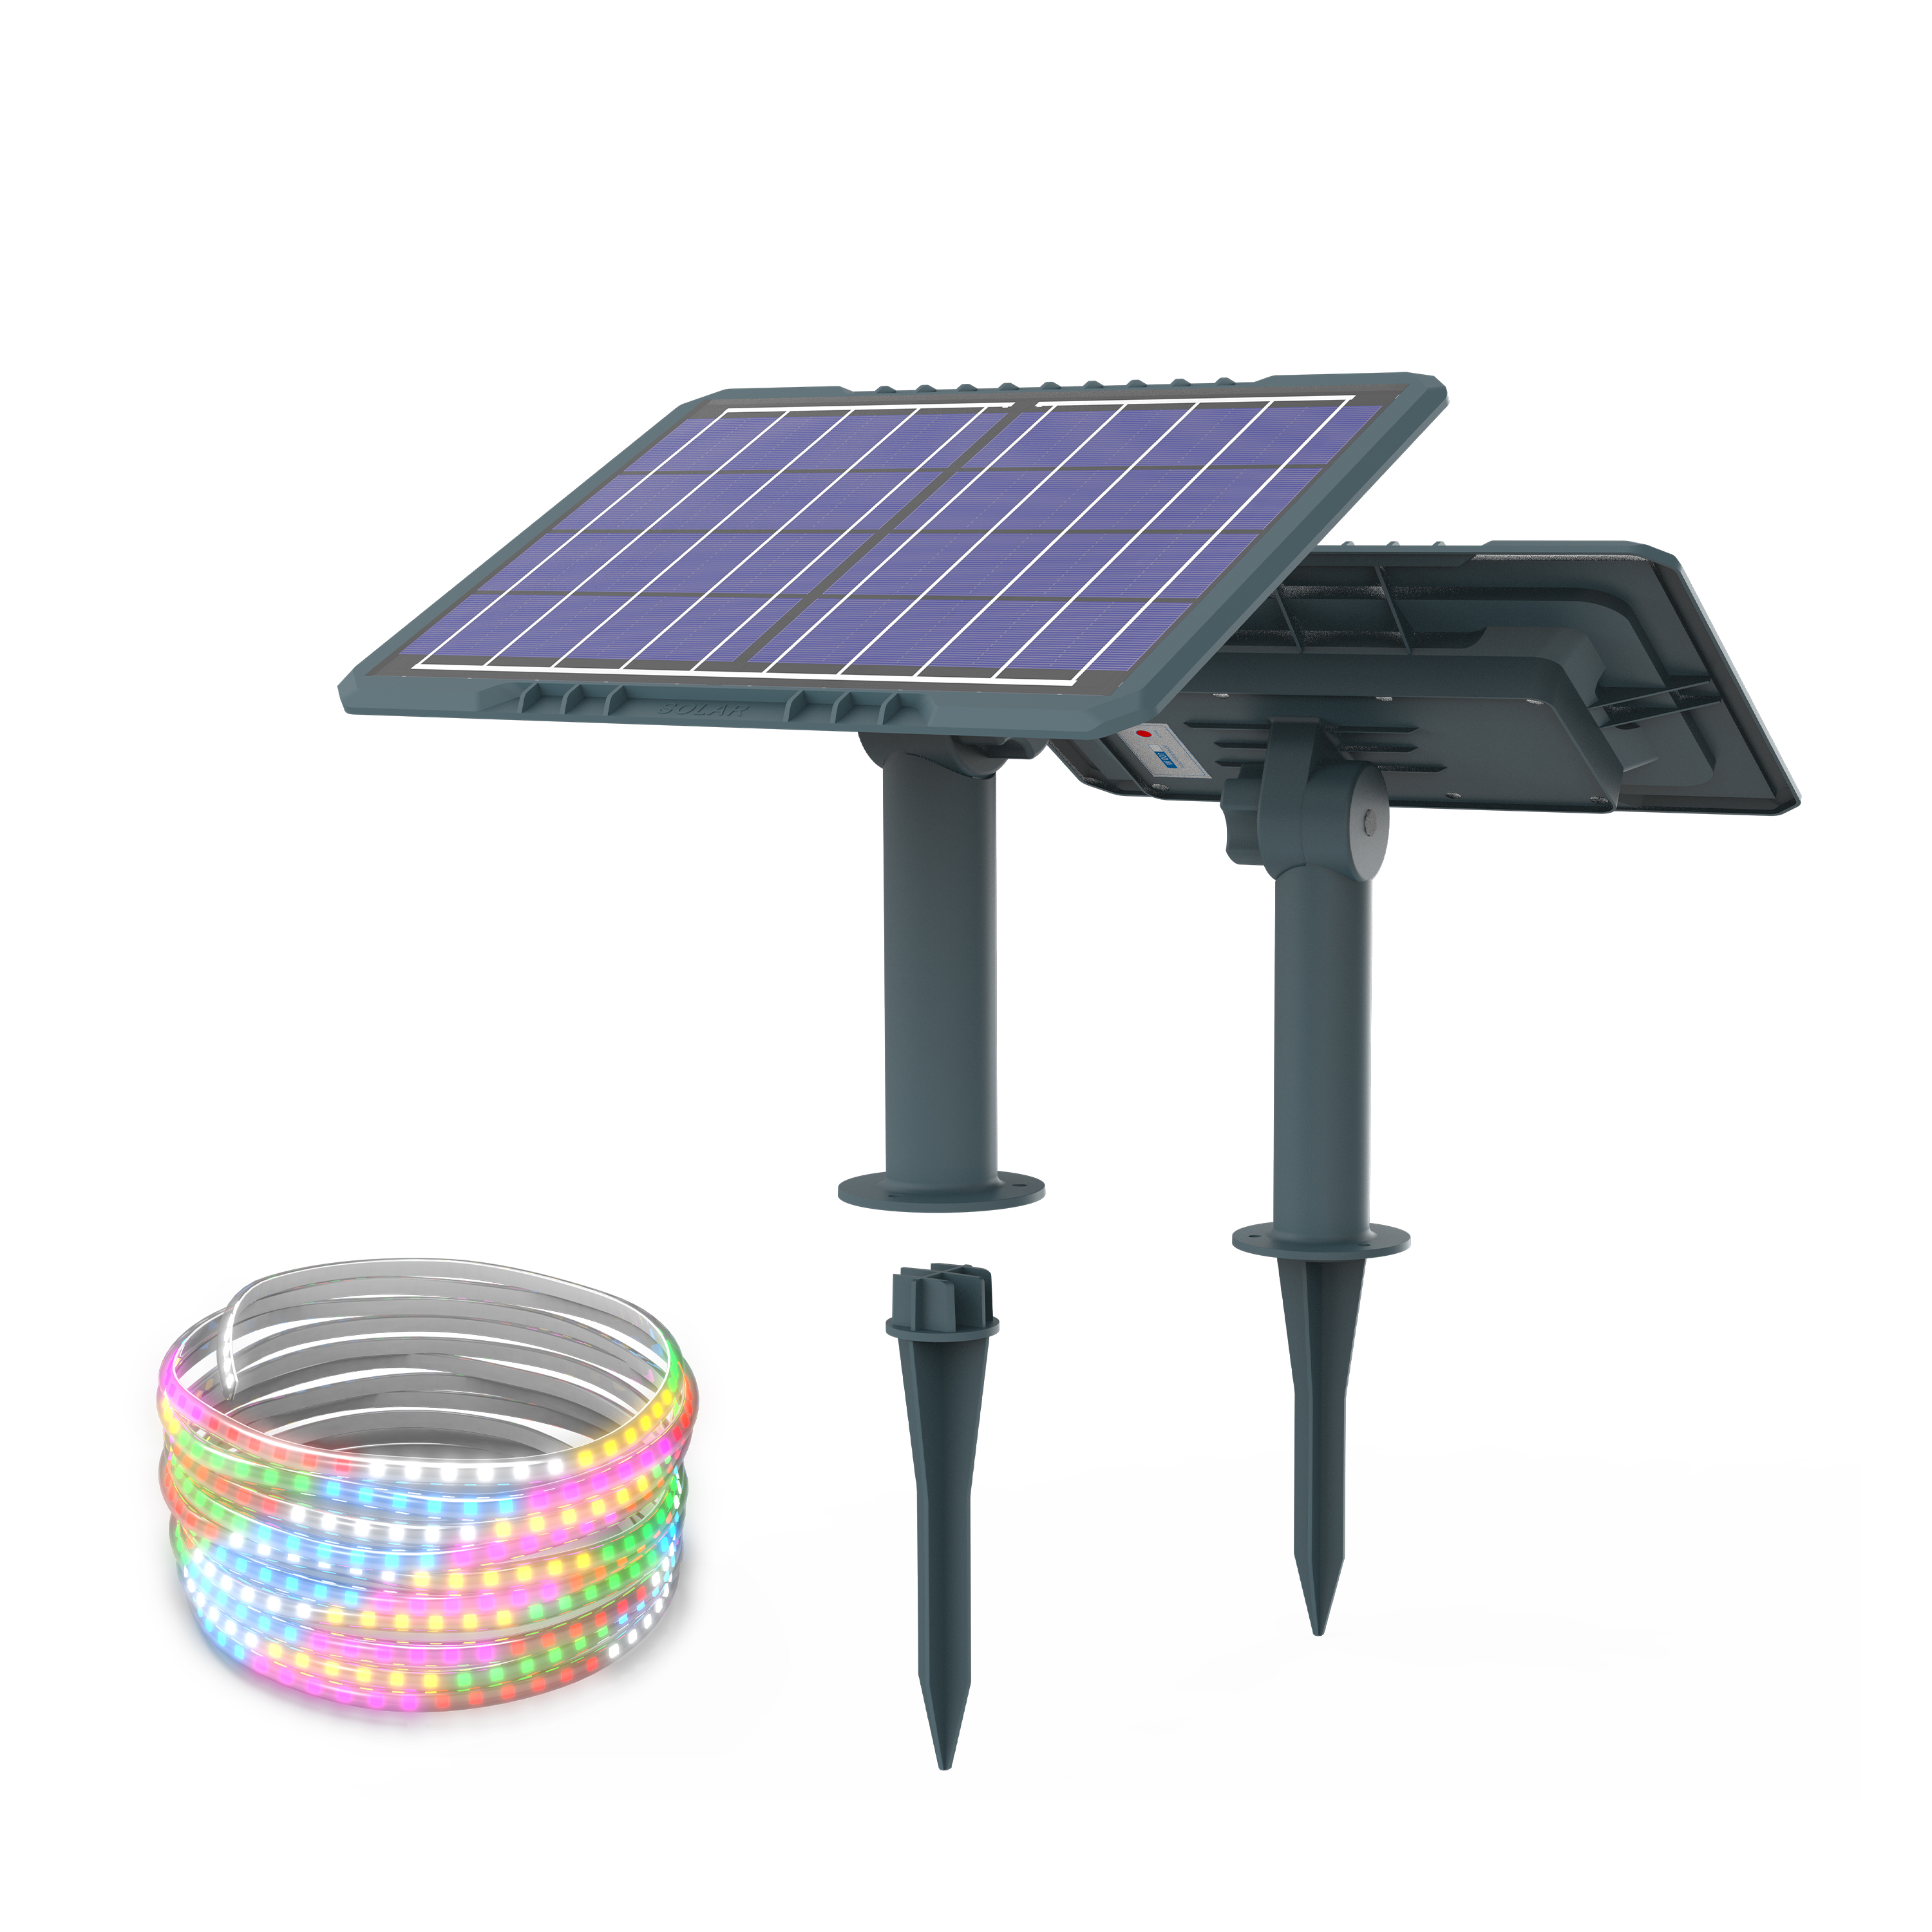 HHSM50C IP65 Solar Strip Light Solar Garden Lights Outdoor Waterproof LED Decor Pool Stairs Roof Patio Walkway Remote Control Switches